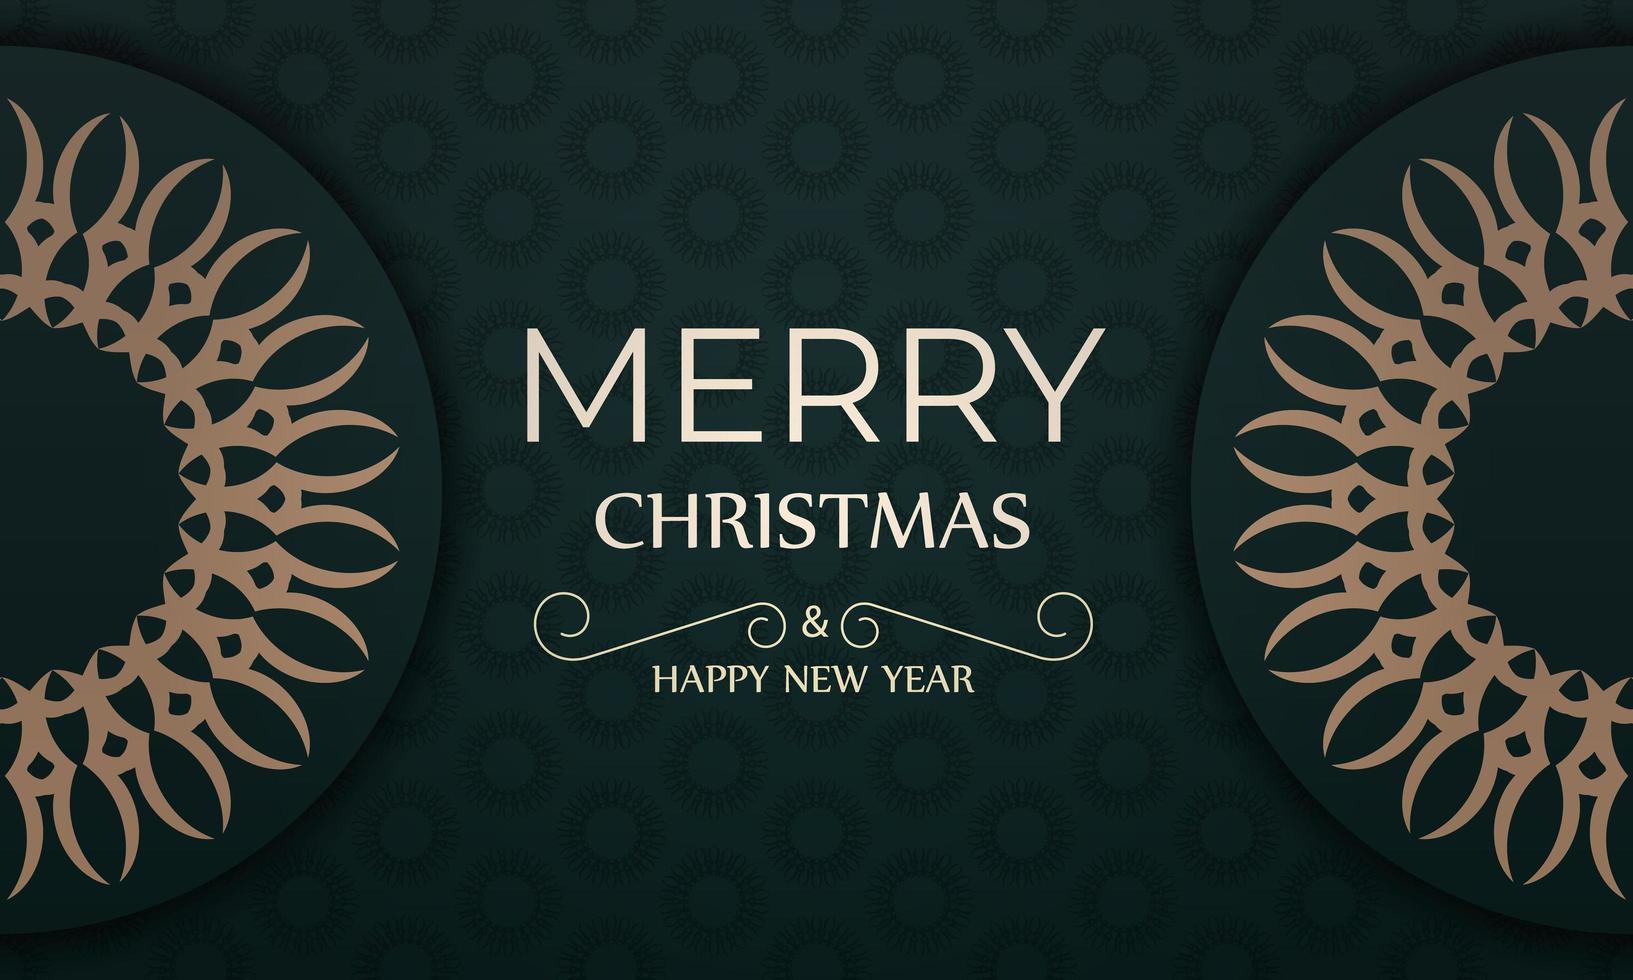 Postcard template Merry Christmas and Happy New Year in dark green color with vintage yellow ornament vector